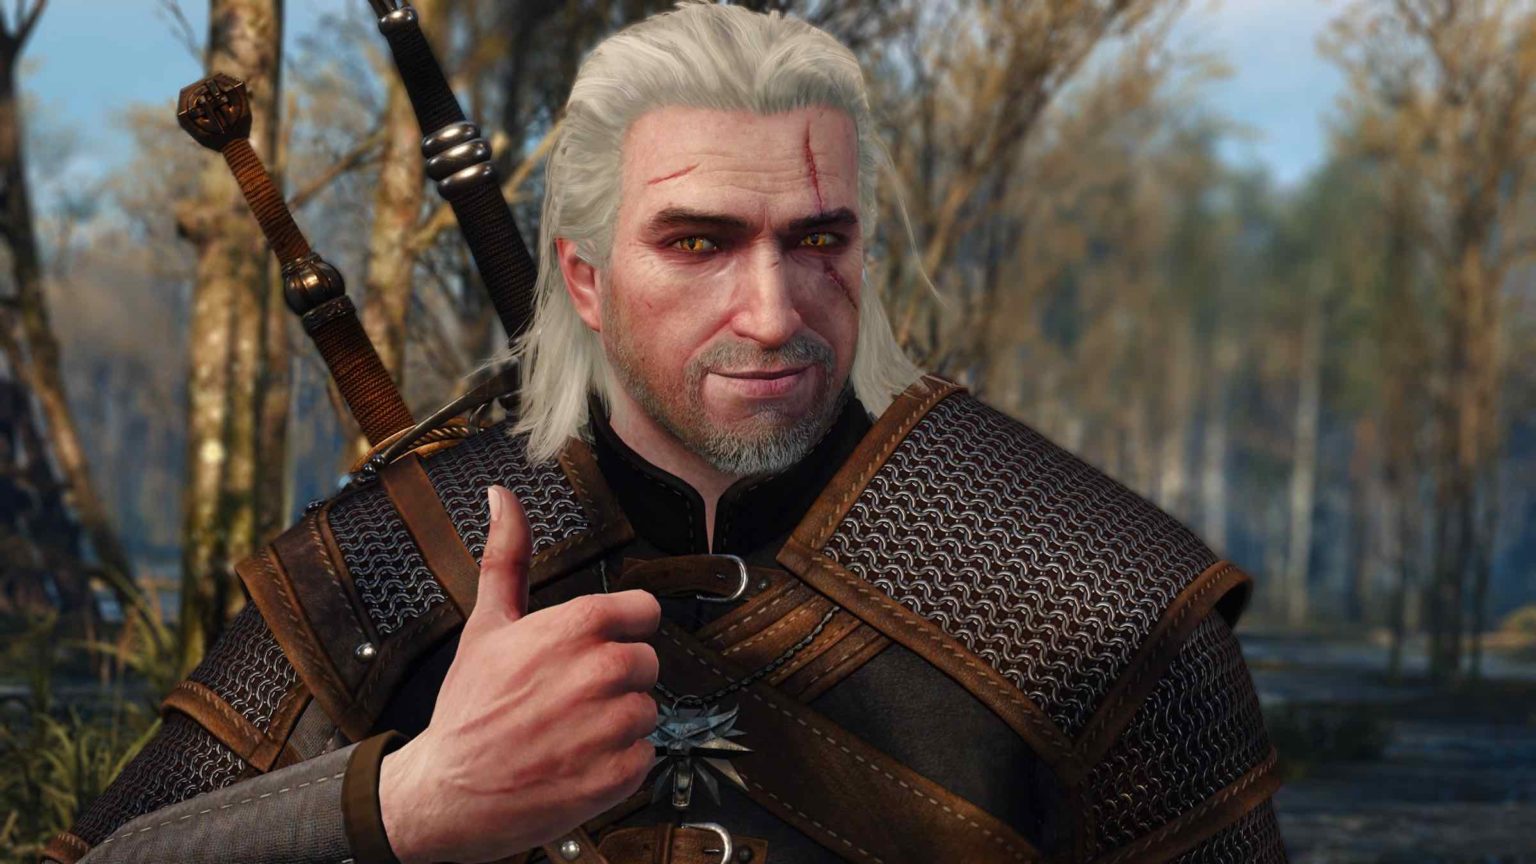 'The Witcher' is one of the most popular novel-based fantasy game series out there. Here are the best cheat codes we know about for 'The Witcher' games.